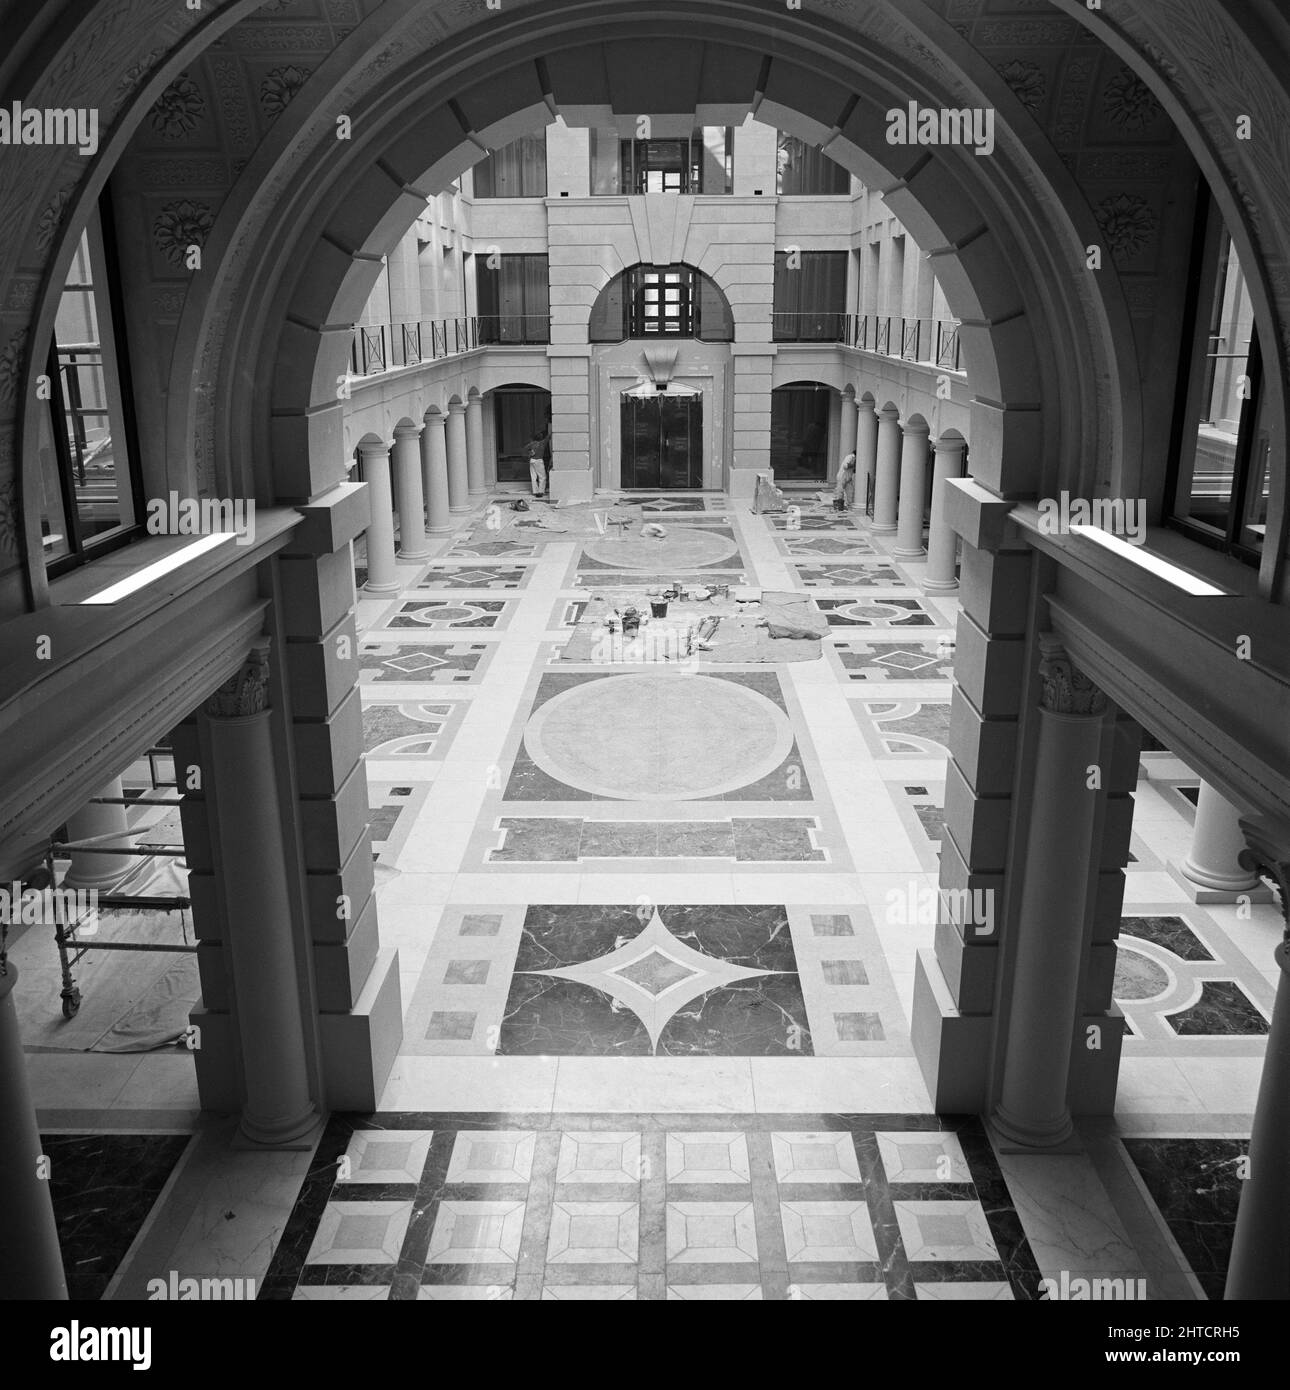 Vintners Place, Upper Thames Street, Queenhithe, London, 28/10/1992. An elevated view looking through the archway at the north end of the galleria at Vintners Place showing the marble floor of the open atrium. Laing undertook the &#xa3;79m management contract for the construction of a 37,000sqm high quality office development at Vintners Place between March 1989 and December 1992.  Work on site began in June 1989 with the demolition of 10 buildings including Vintry House and Kennet Wharf on the riverside.  The listed fa&#xe7;ade of Thames House along Queen Street Place was preserved and incorp Stock Photo